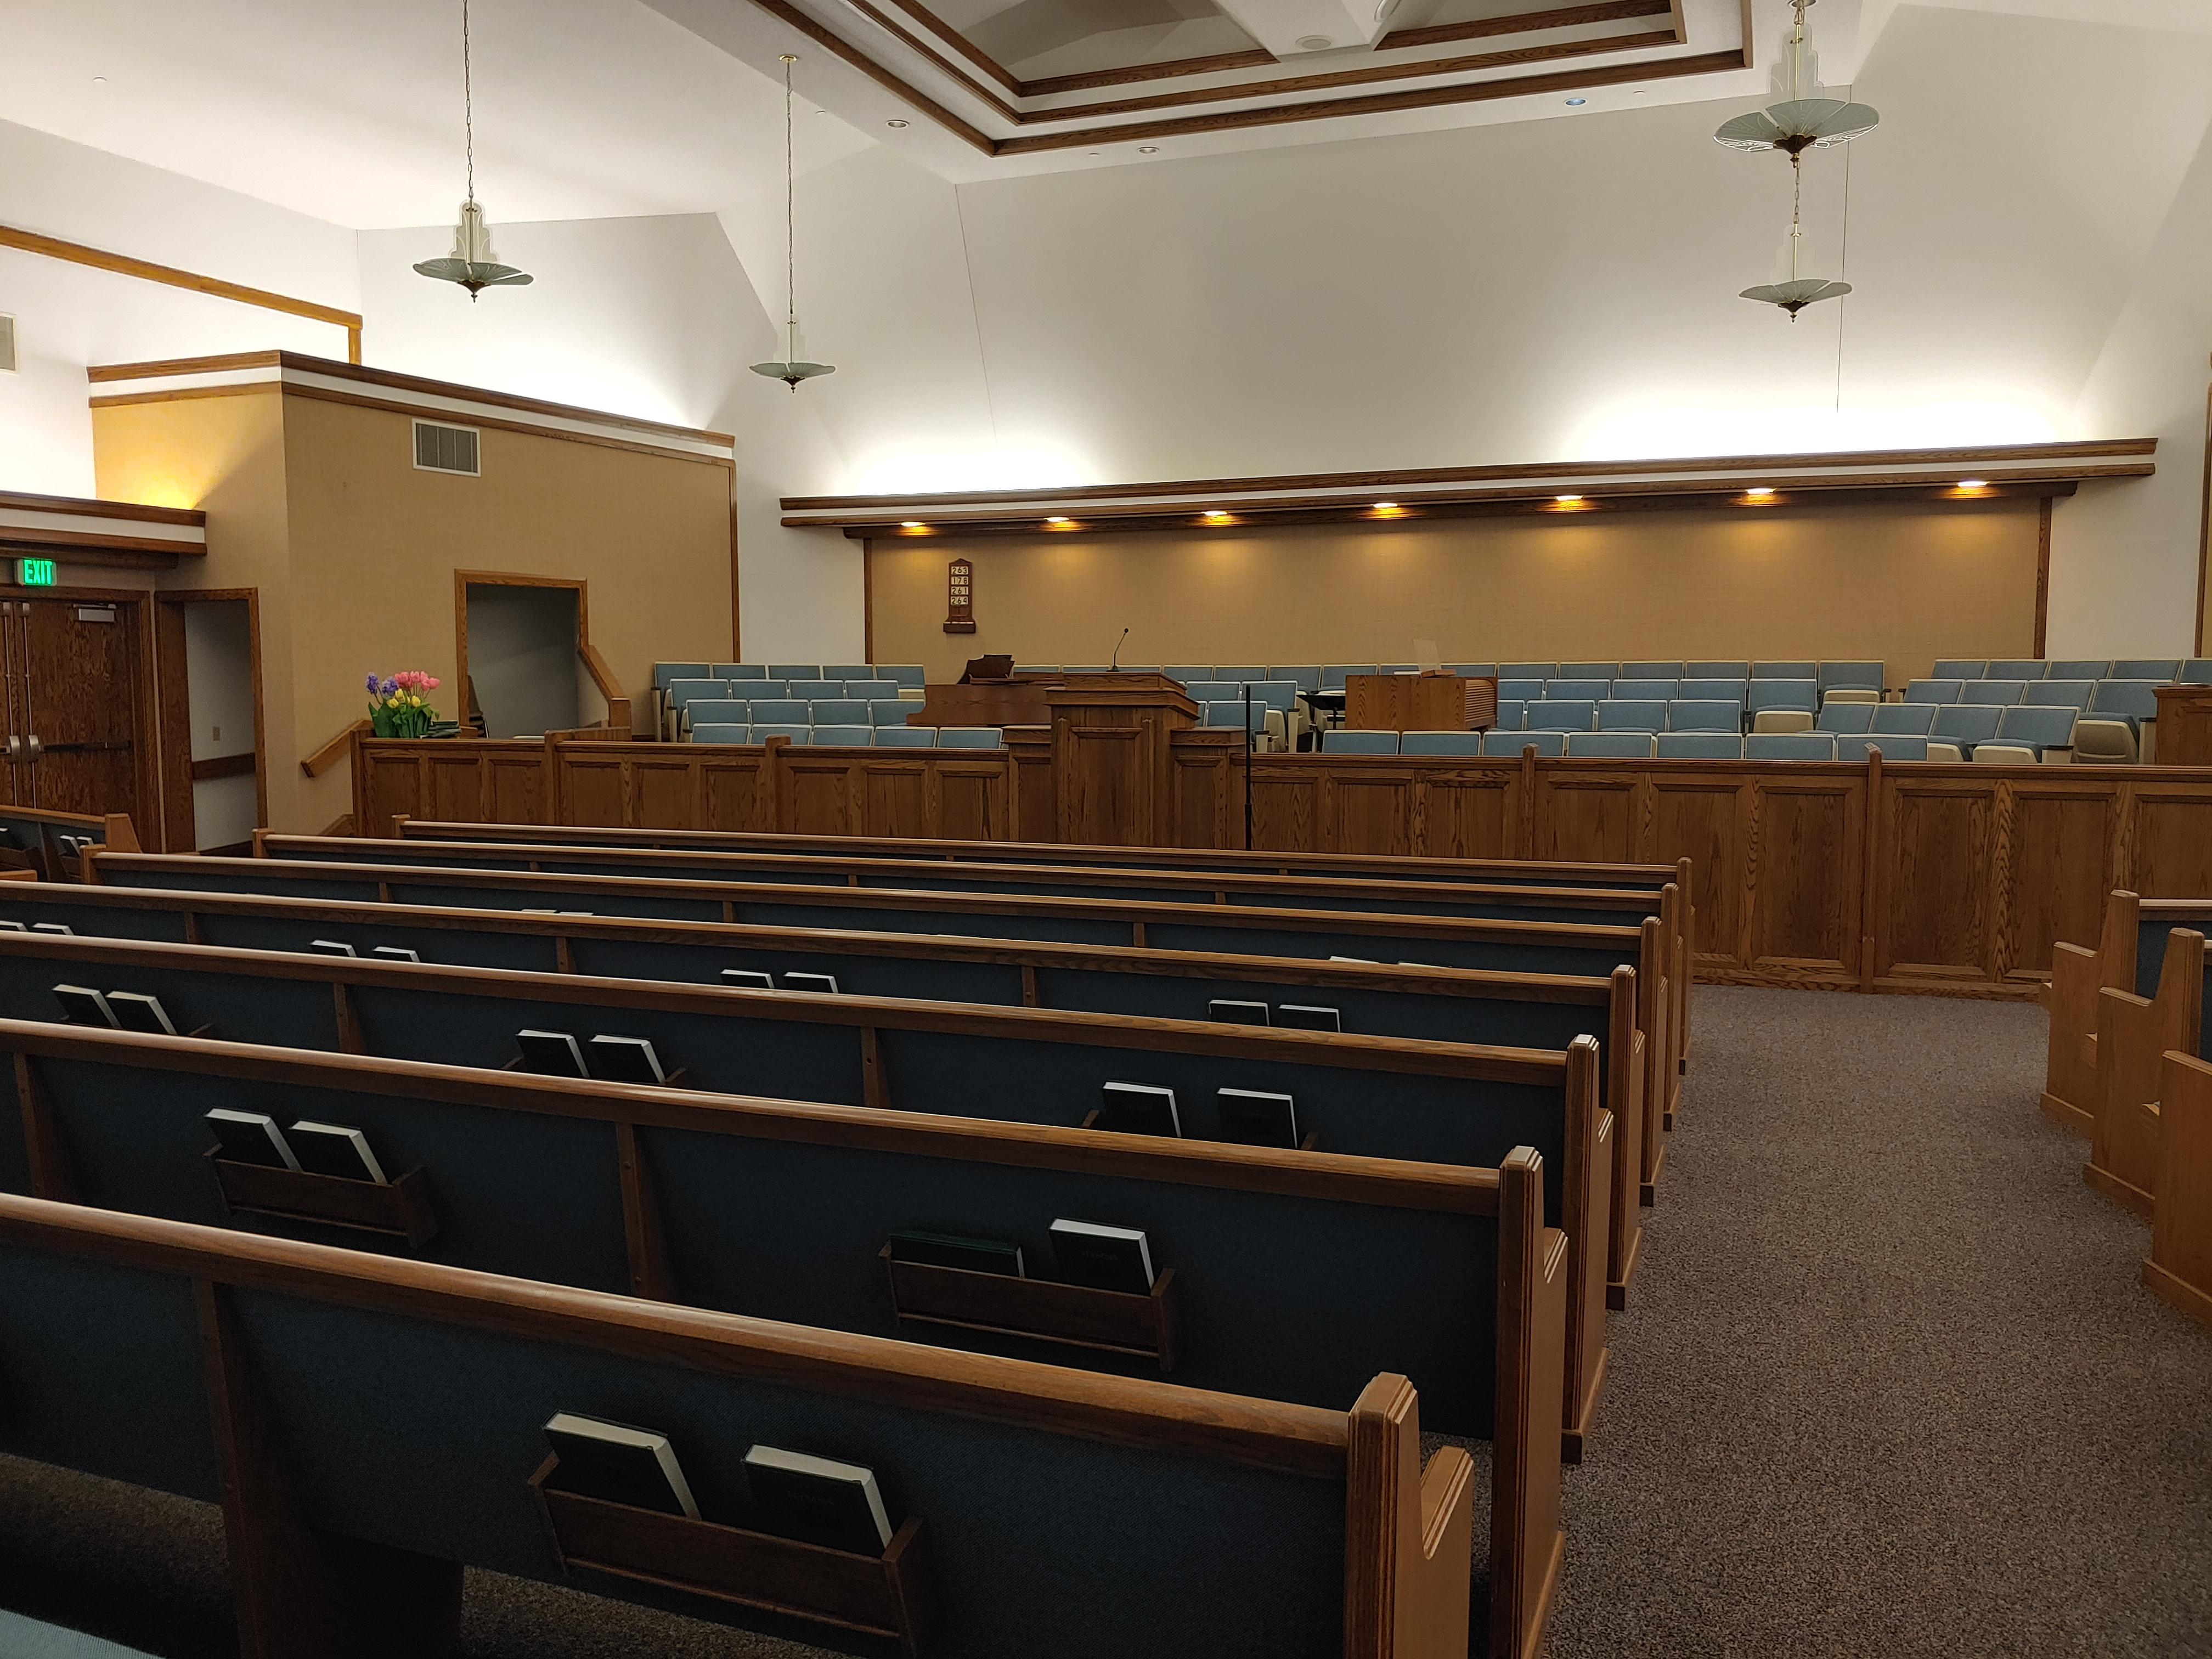 Chapel of the Perrysburg meetinghouse of The Church of Jesus Christ of Latter-day Saints located at 11050 Avenue Rd, Perrysburg, OH 43551.